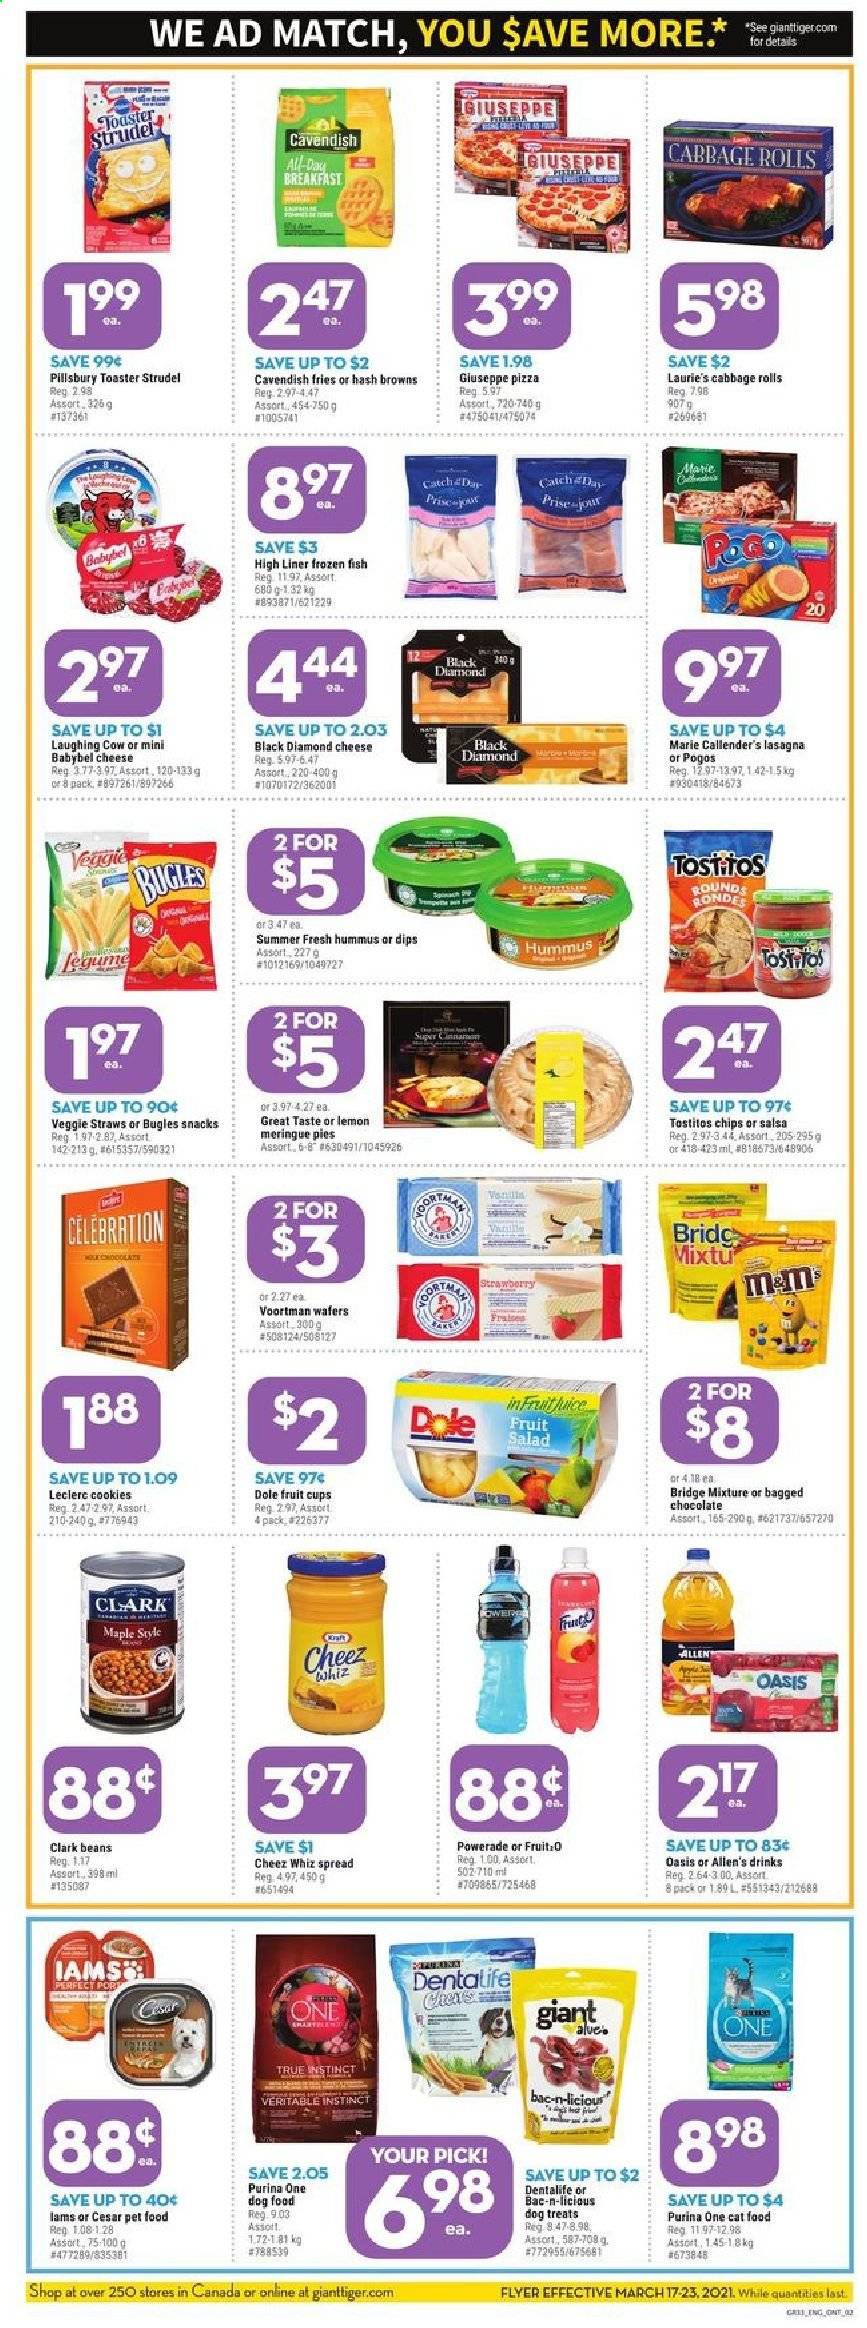 thumbnail - Giant Tiger Flyer - March 17, 2021 - March 23, 2021 - Sales products - strudel, beans, cabbage, salad, Dole, fruit cup, fish, pizza, Pillsbury, lasagna meal, Marie Callender's, hummus, The Laughing Cow, Babybel, hash browns, potato fries, cookies, wafers, chocolate, snack, Celebration, veggie straws, Tostitos, salsa, animal food, dog food, Purina, Dentalife, Iams. Page 2.